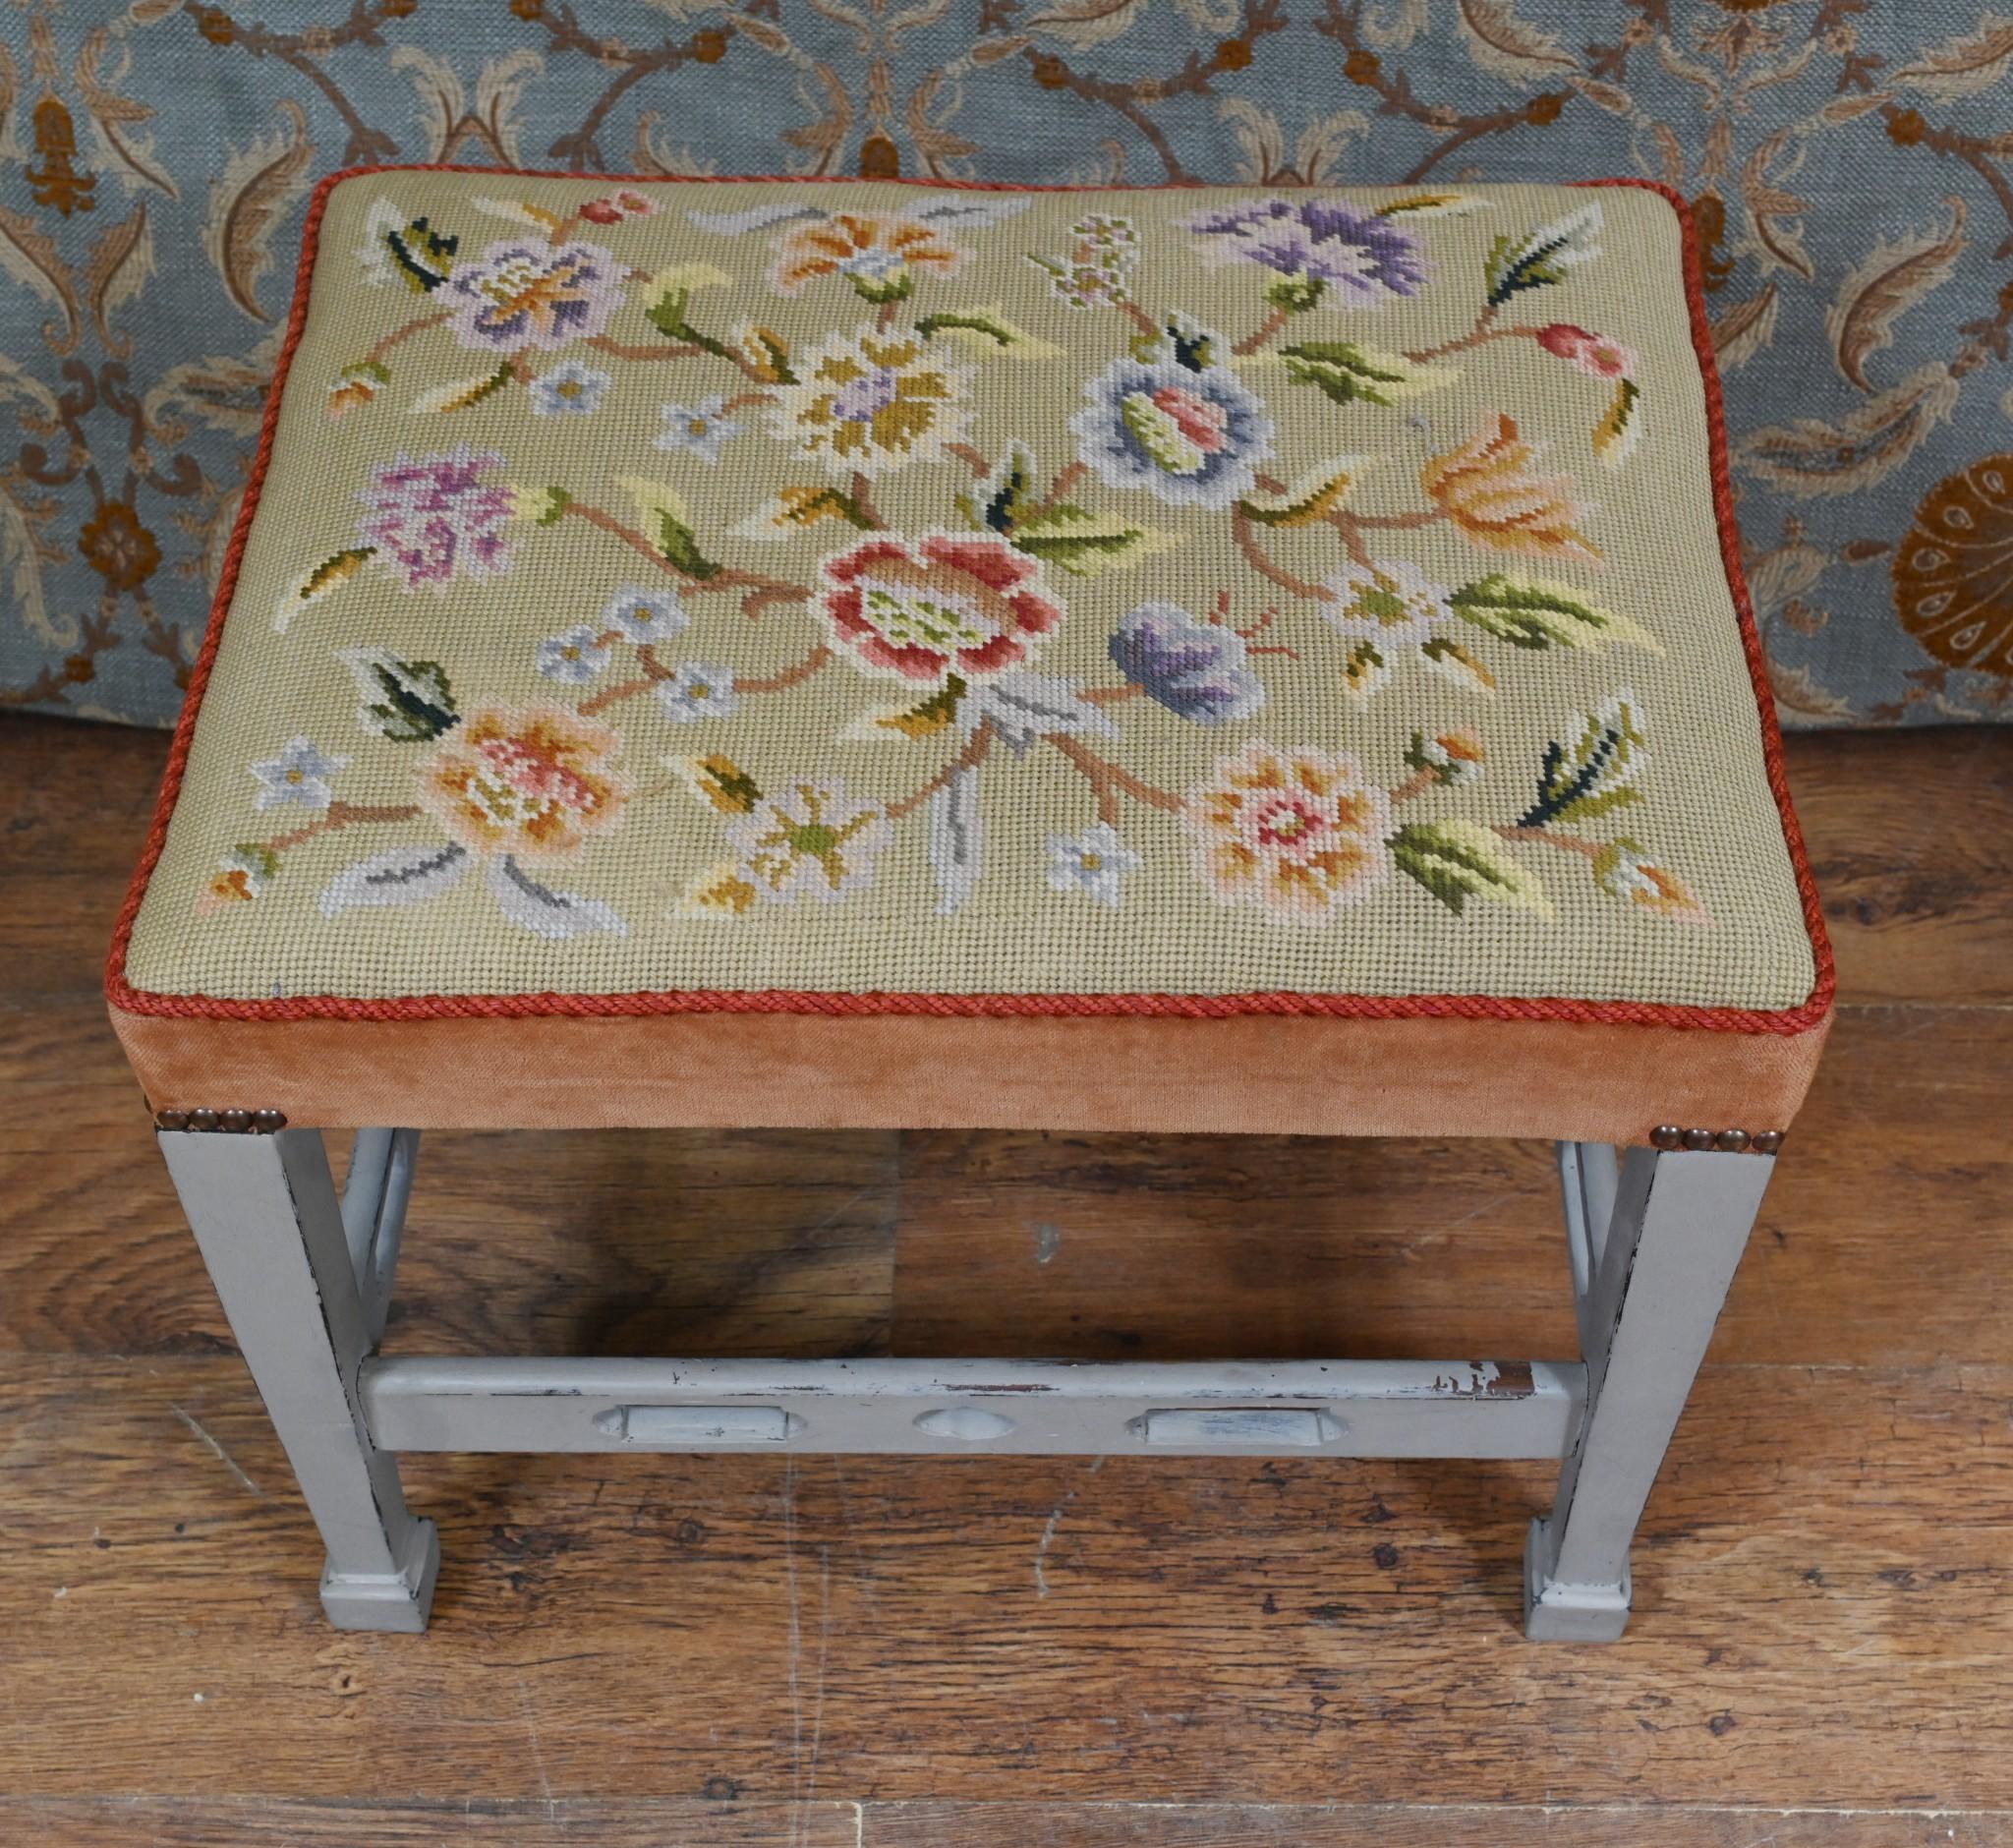 Late 20th Century Painted Edwardian Stool Tapestry Needlepoint For Sale